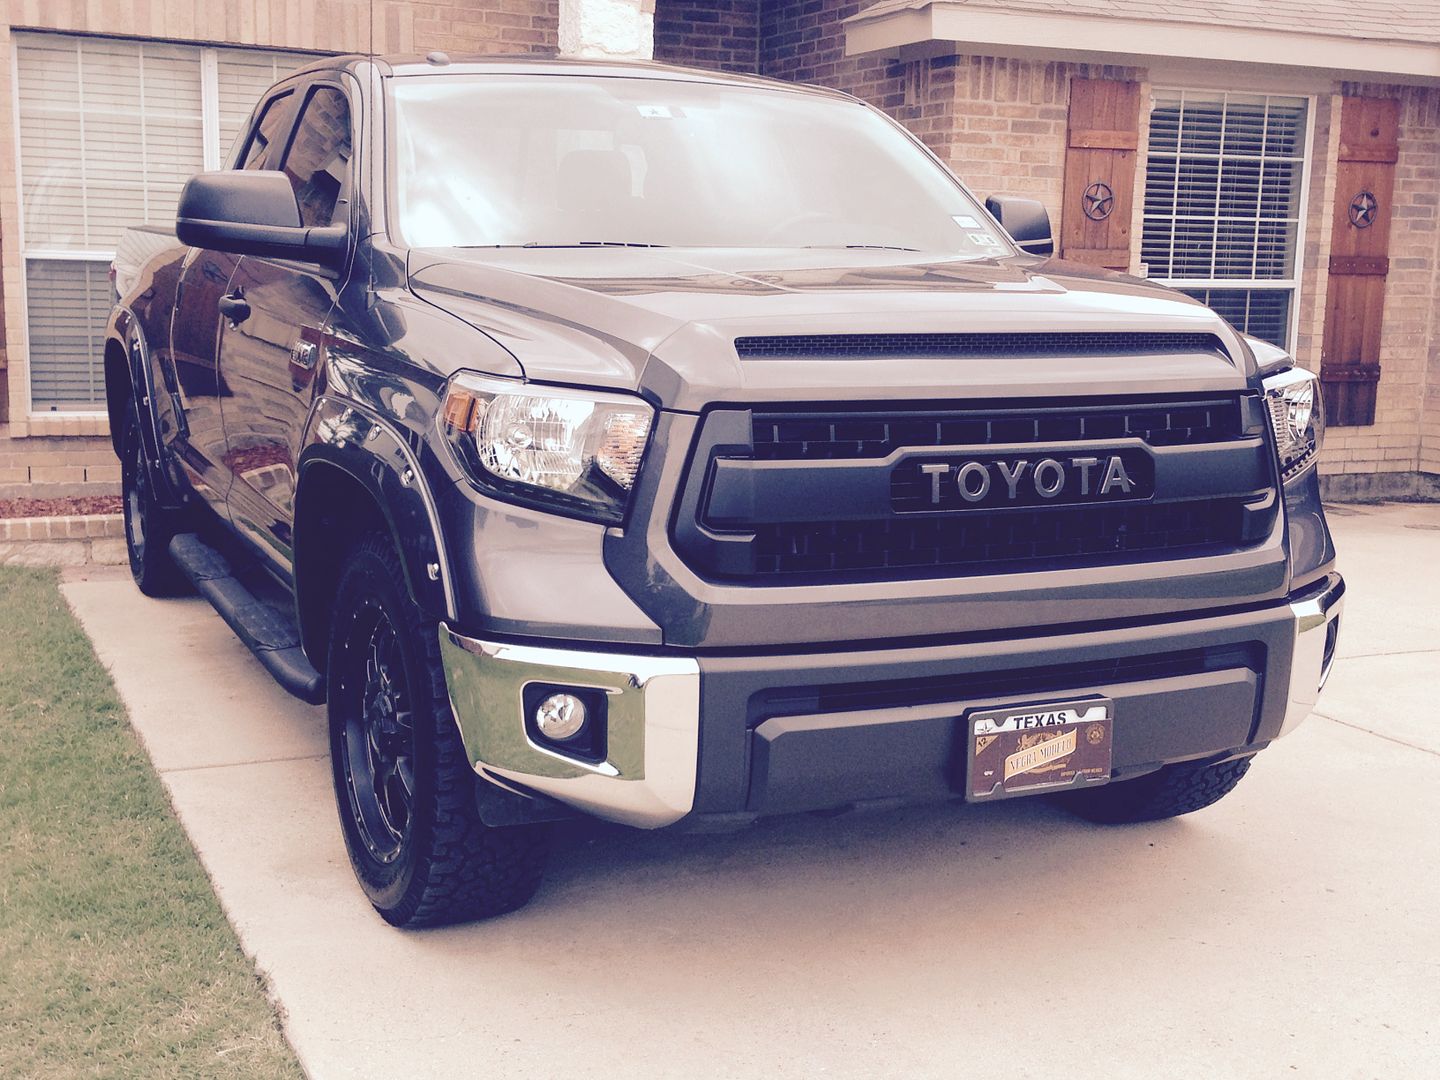 Toyota Tundra Trd Pro Front Grill